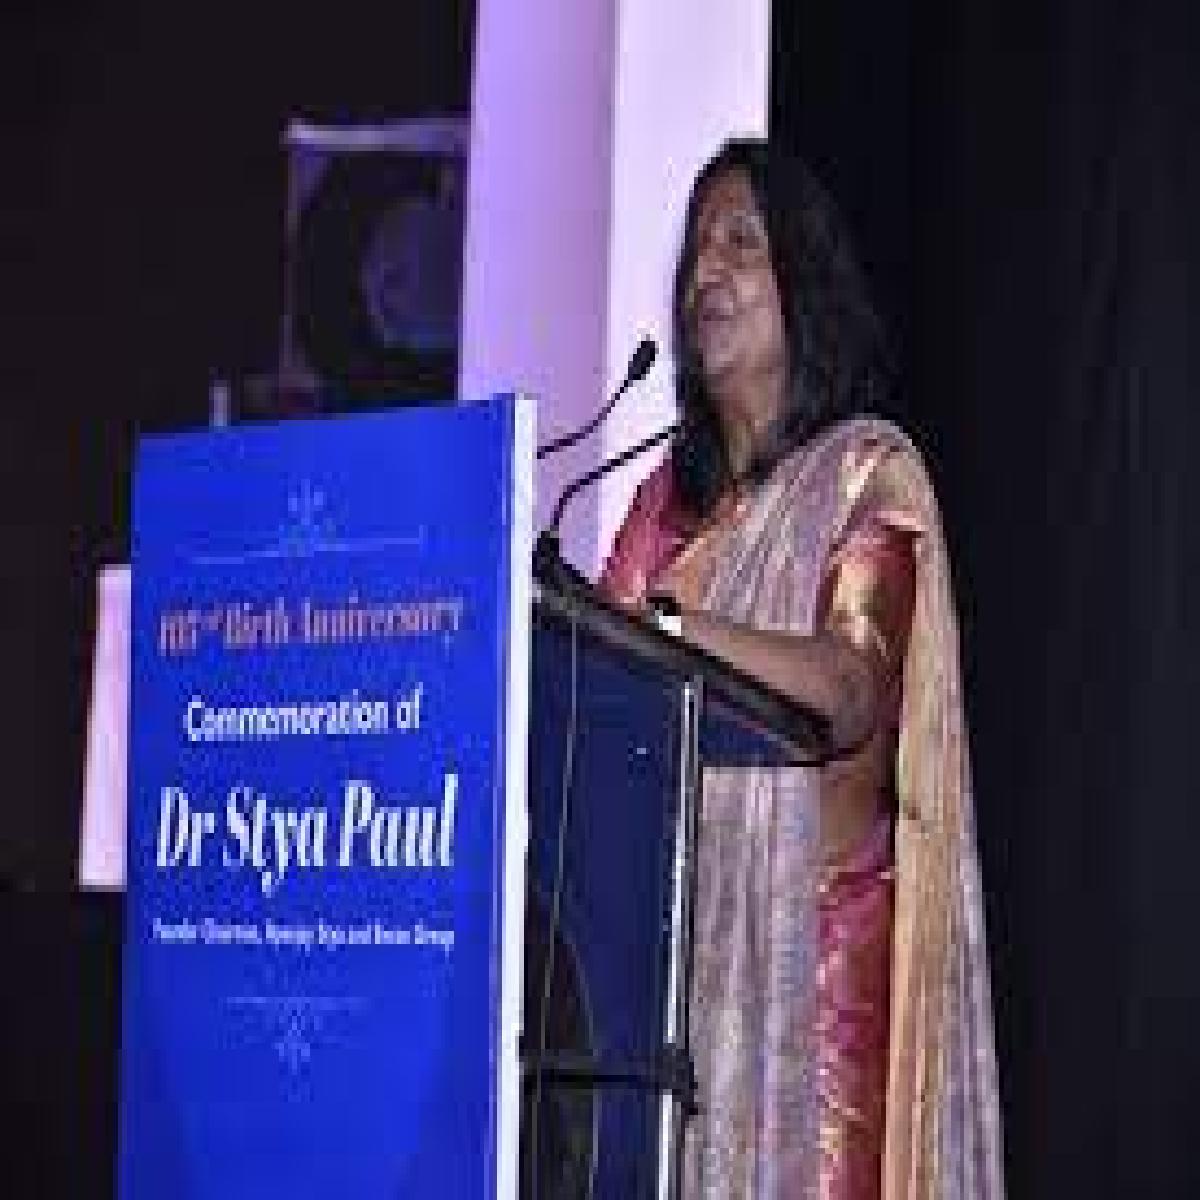 Dr Stya Paul's Life Reflects the Value of Resilience, Says Mrs Sushma Paul Berlia, Chairperson Apeejay Education